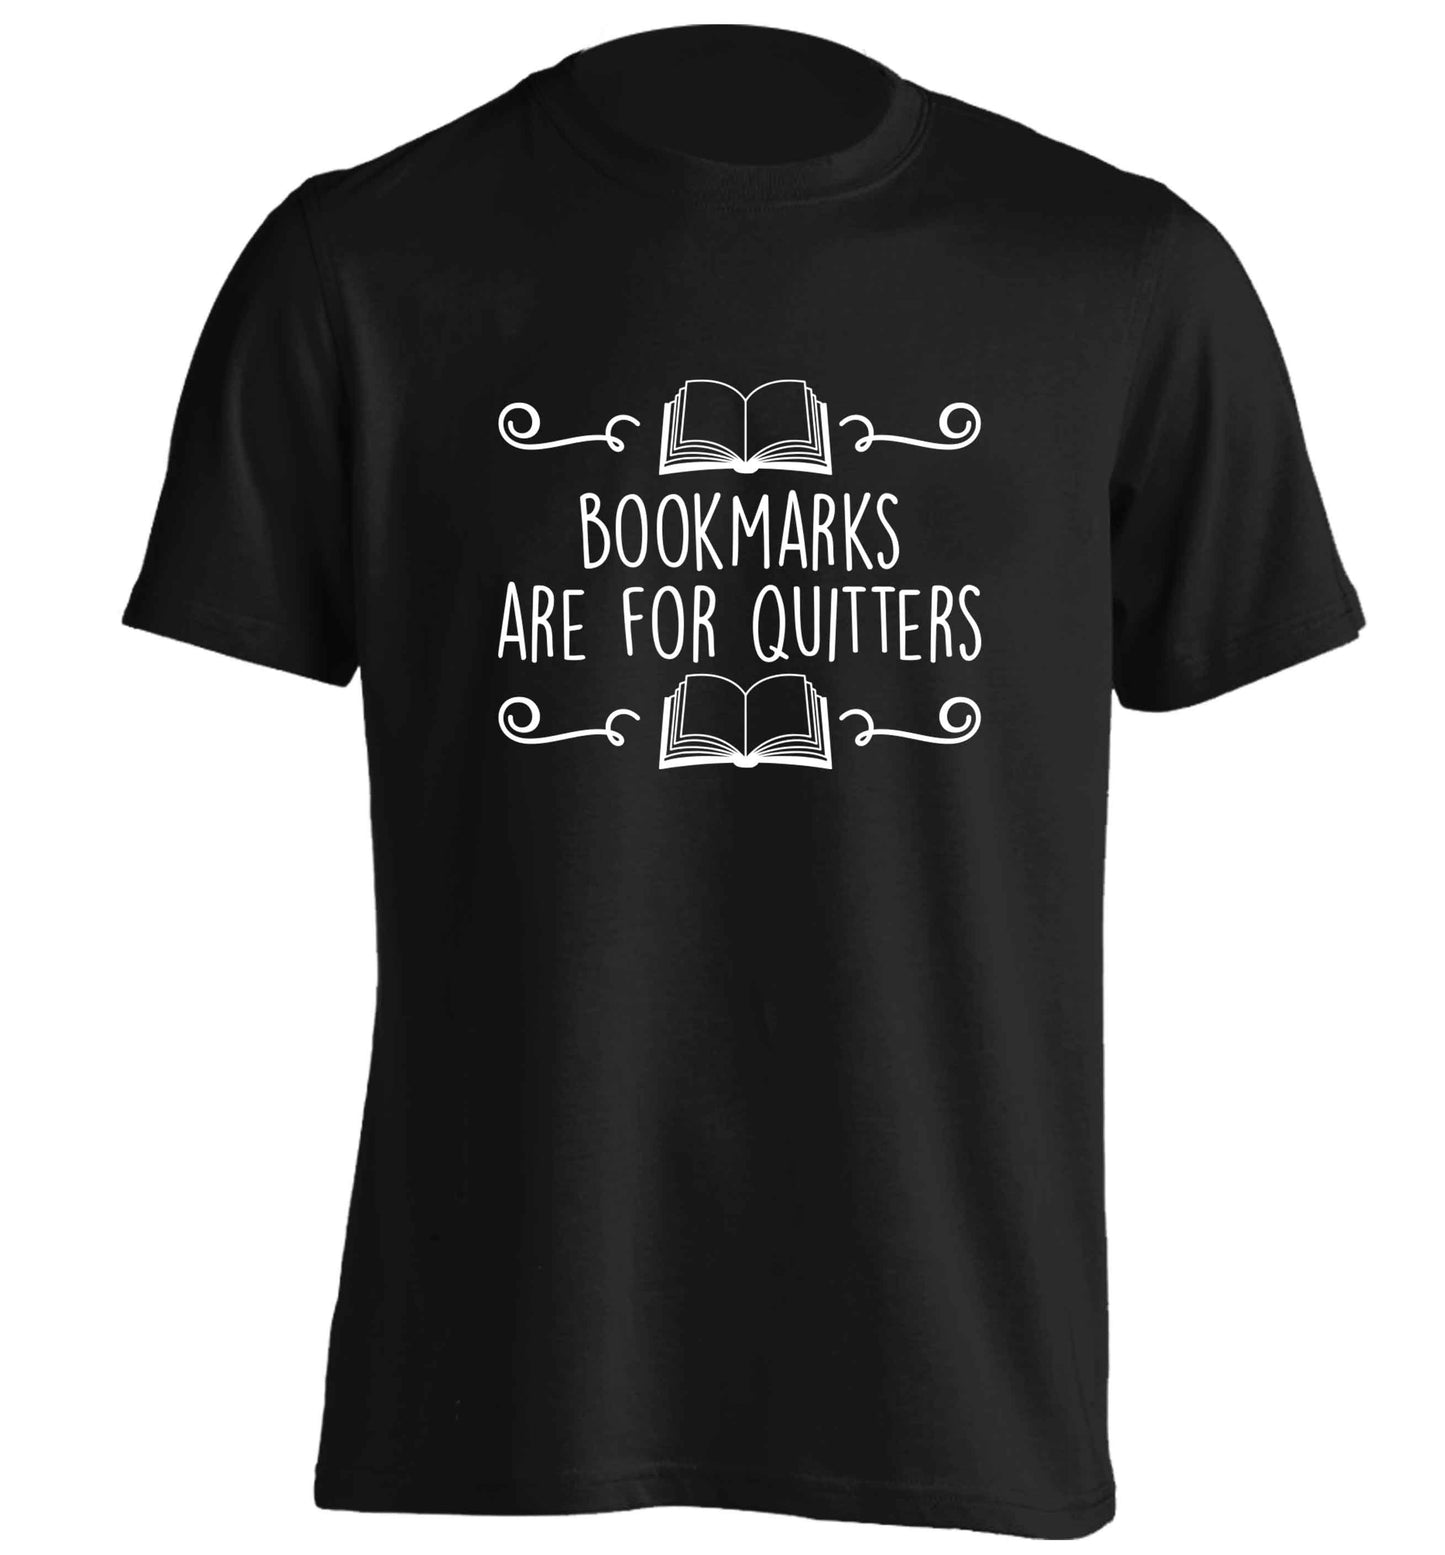 Bookmarks are for quitters adults unisex black Tshirt 2XL